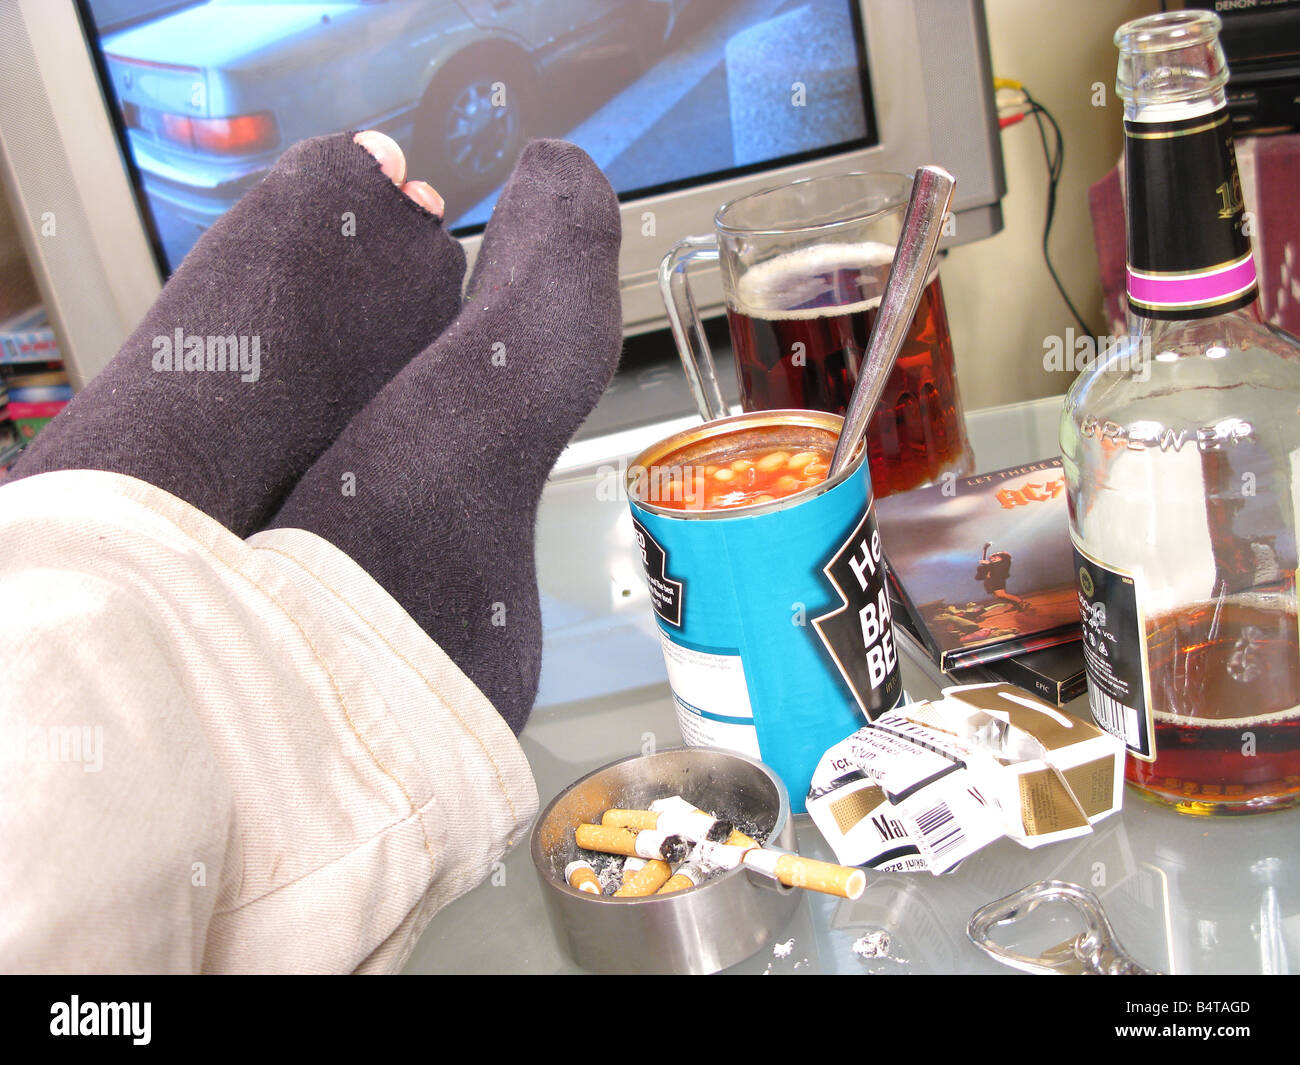 Feet up on an untidy table in a bachelor pad, with toes showing through a torn sock. Stock Photo